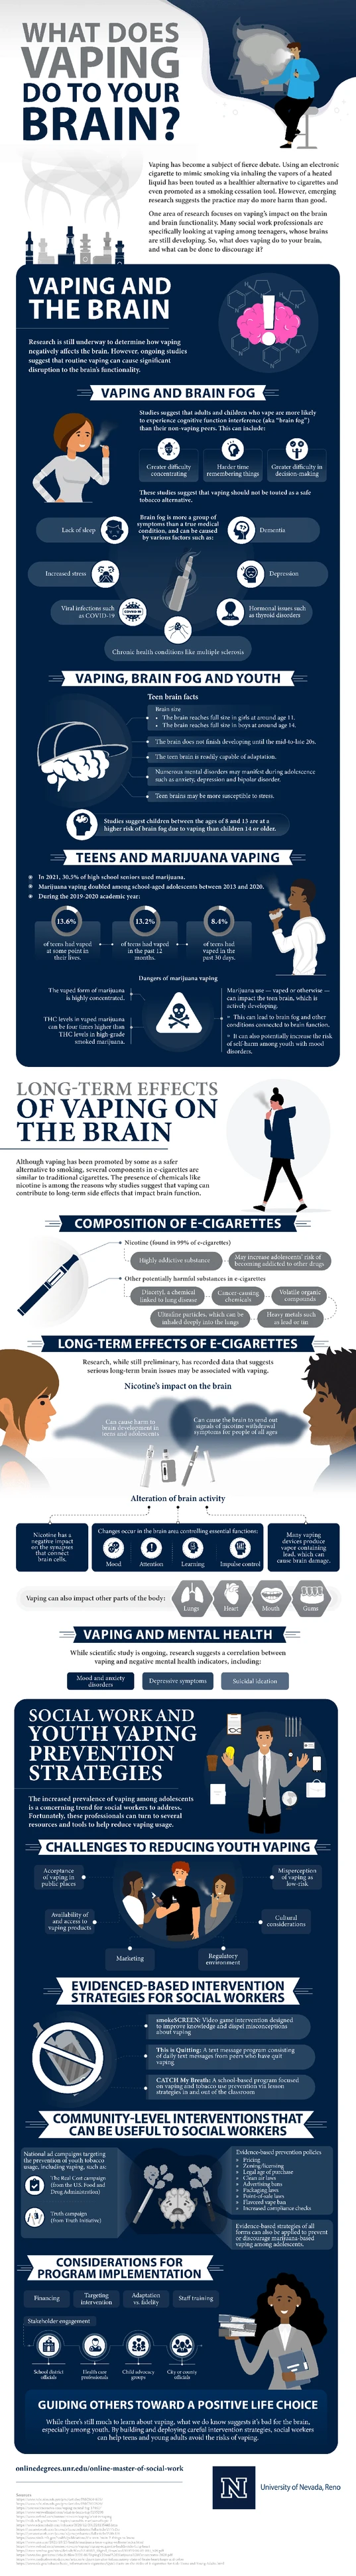 What does vaping do to your brain